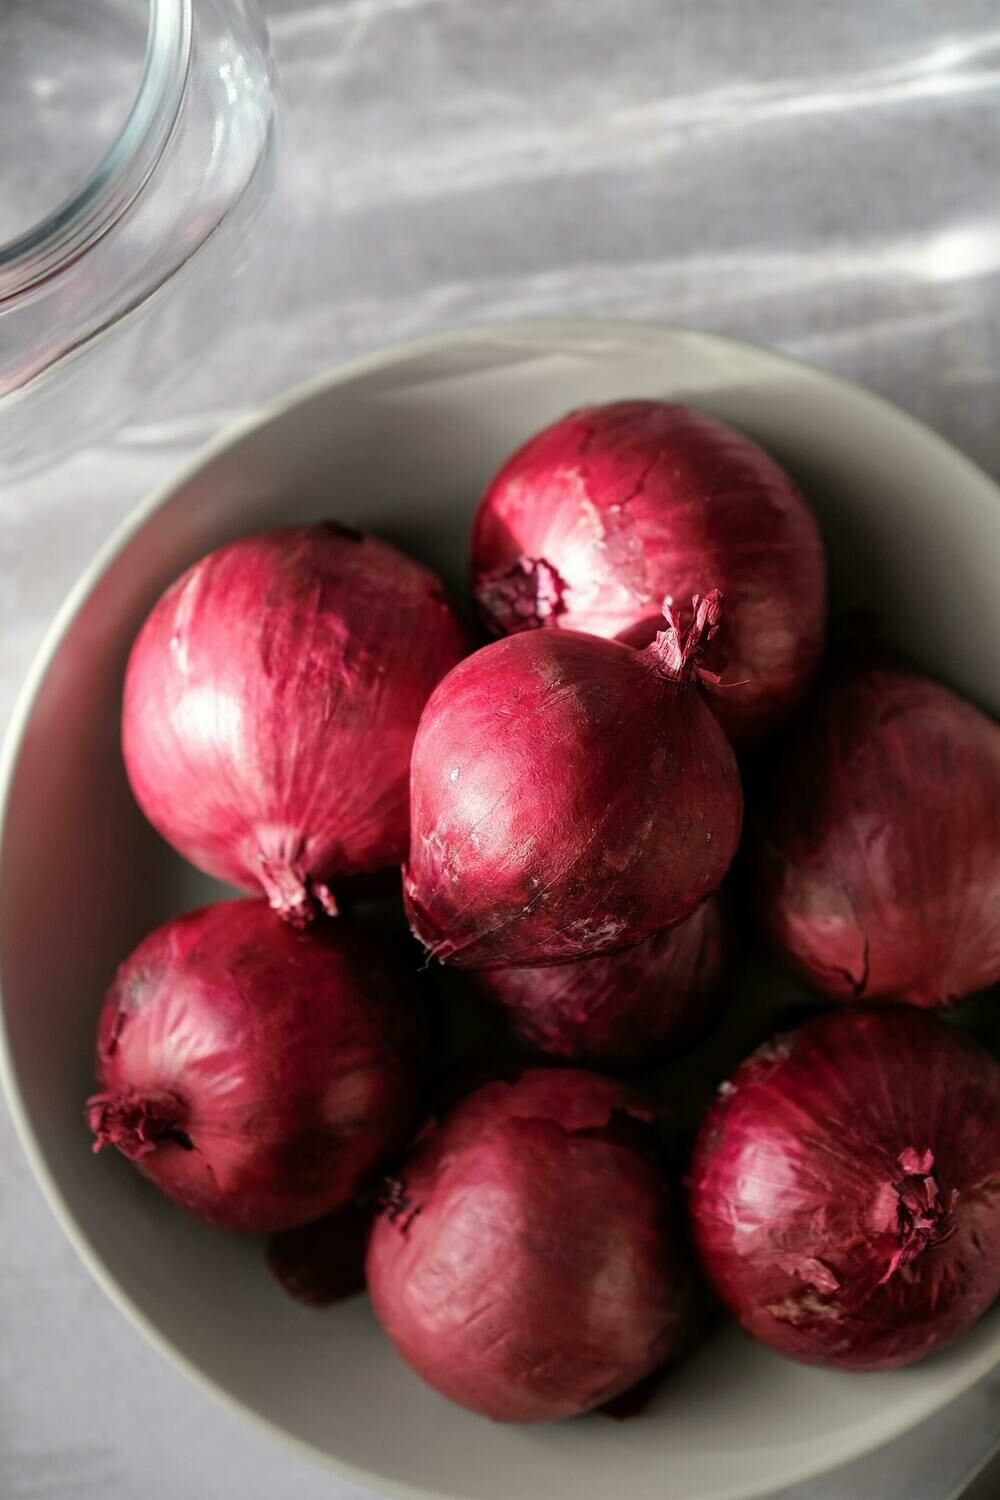 Red Onion - Pack of 4